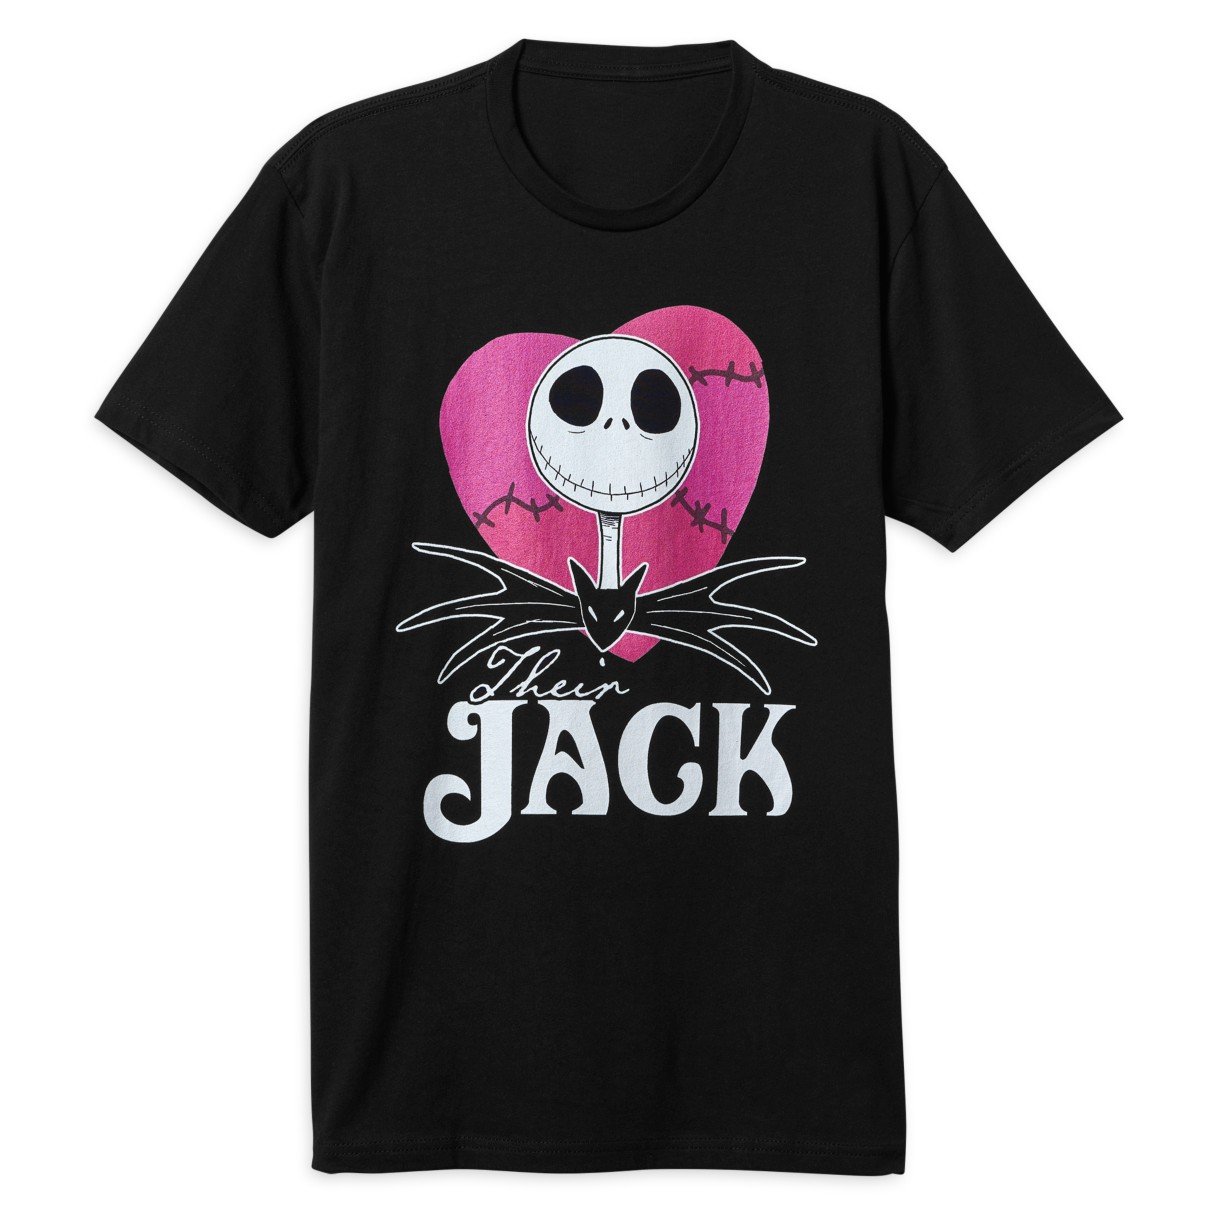 | Jack\'\' shopDisney for Christmas Adults The Before Nightmare \'\'Their T-Shirt Companion